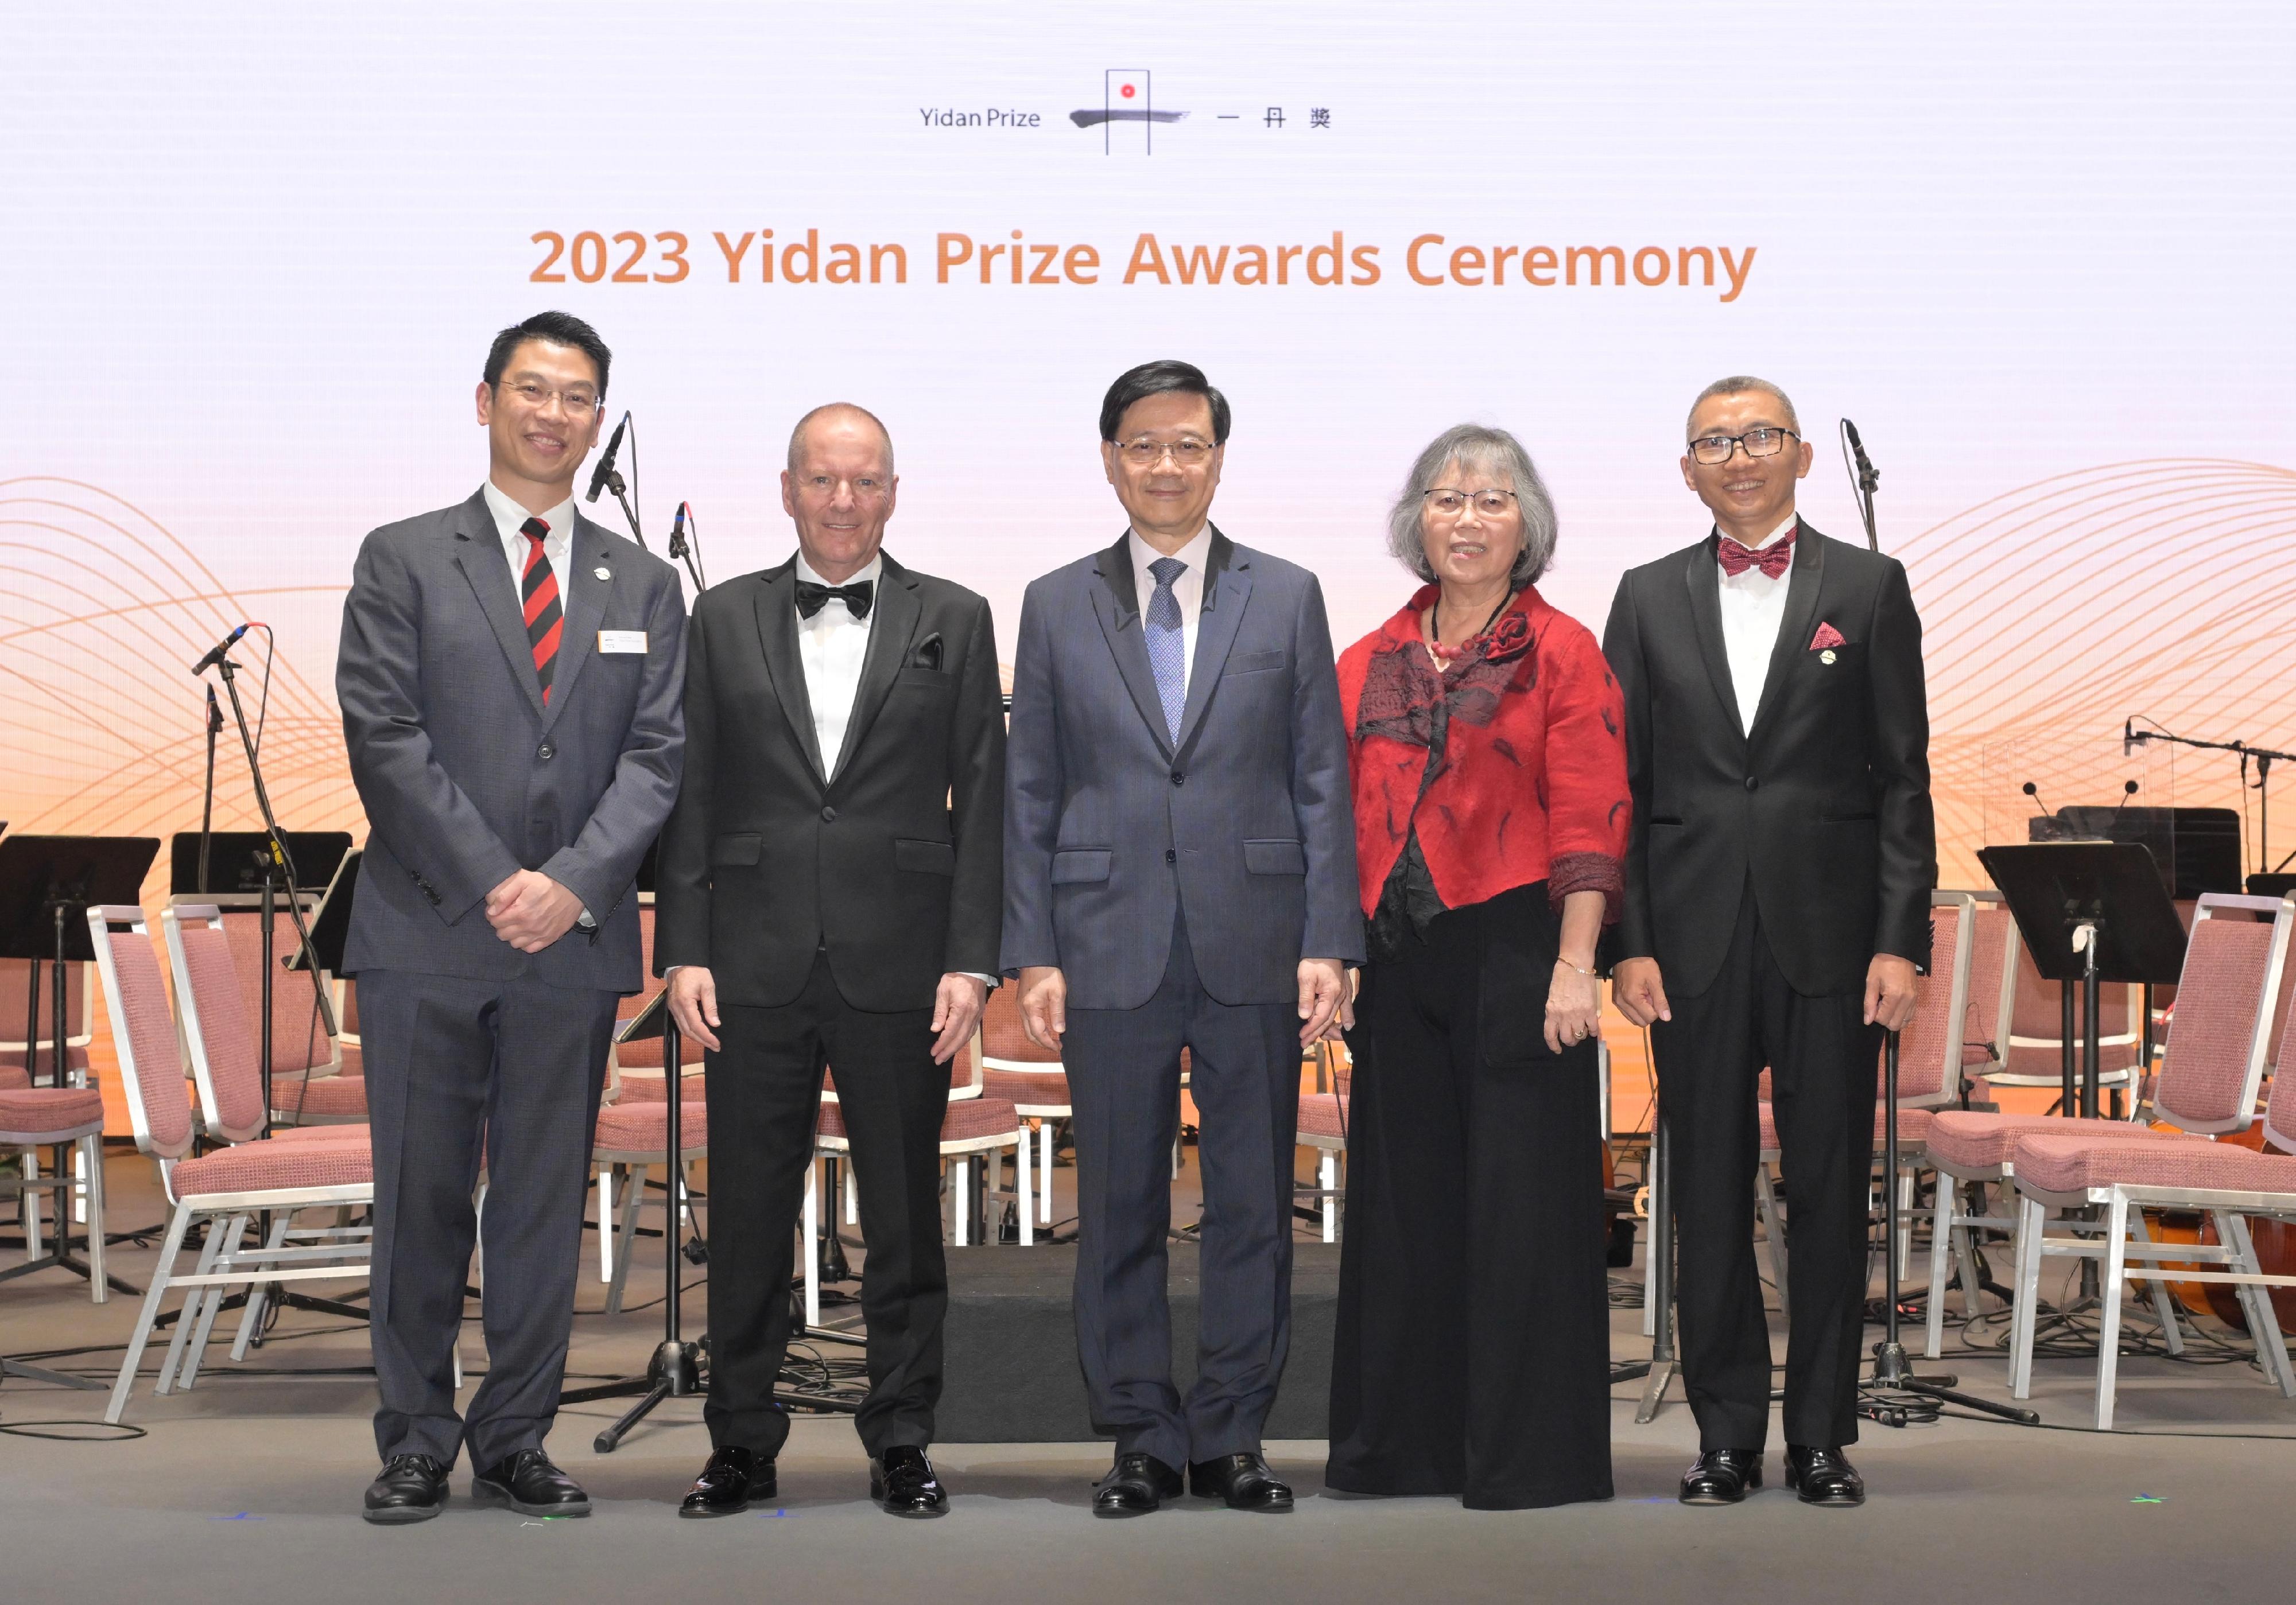 The Chief Executive, Mr John Lee, attended the 2023 Yidan Prize Awards Ceremony today (December 3). Photo shows (from left) the Secretary-General of the Yidan Prize Foundation, Mr Edward Ma; 2023 Yidan Prize for Education Development Laureate, Mr Shai Reshef; Mr Lee; 2023 Yidan Prize for Education Research Laureate, Professor Michelene Chi, and the Founder of Yidan Prize, Dr Charles Chen, at the ceremony.